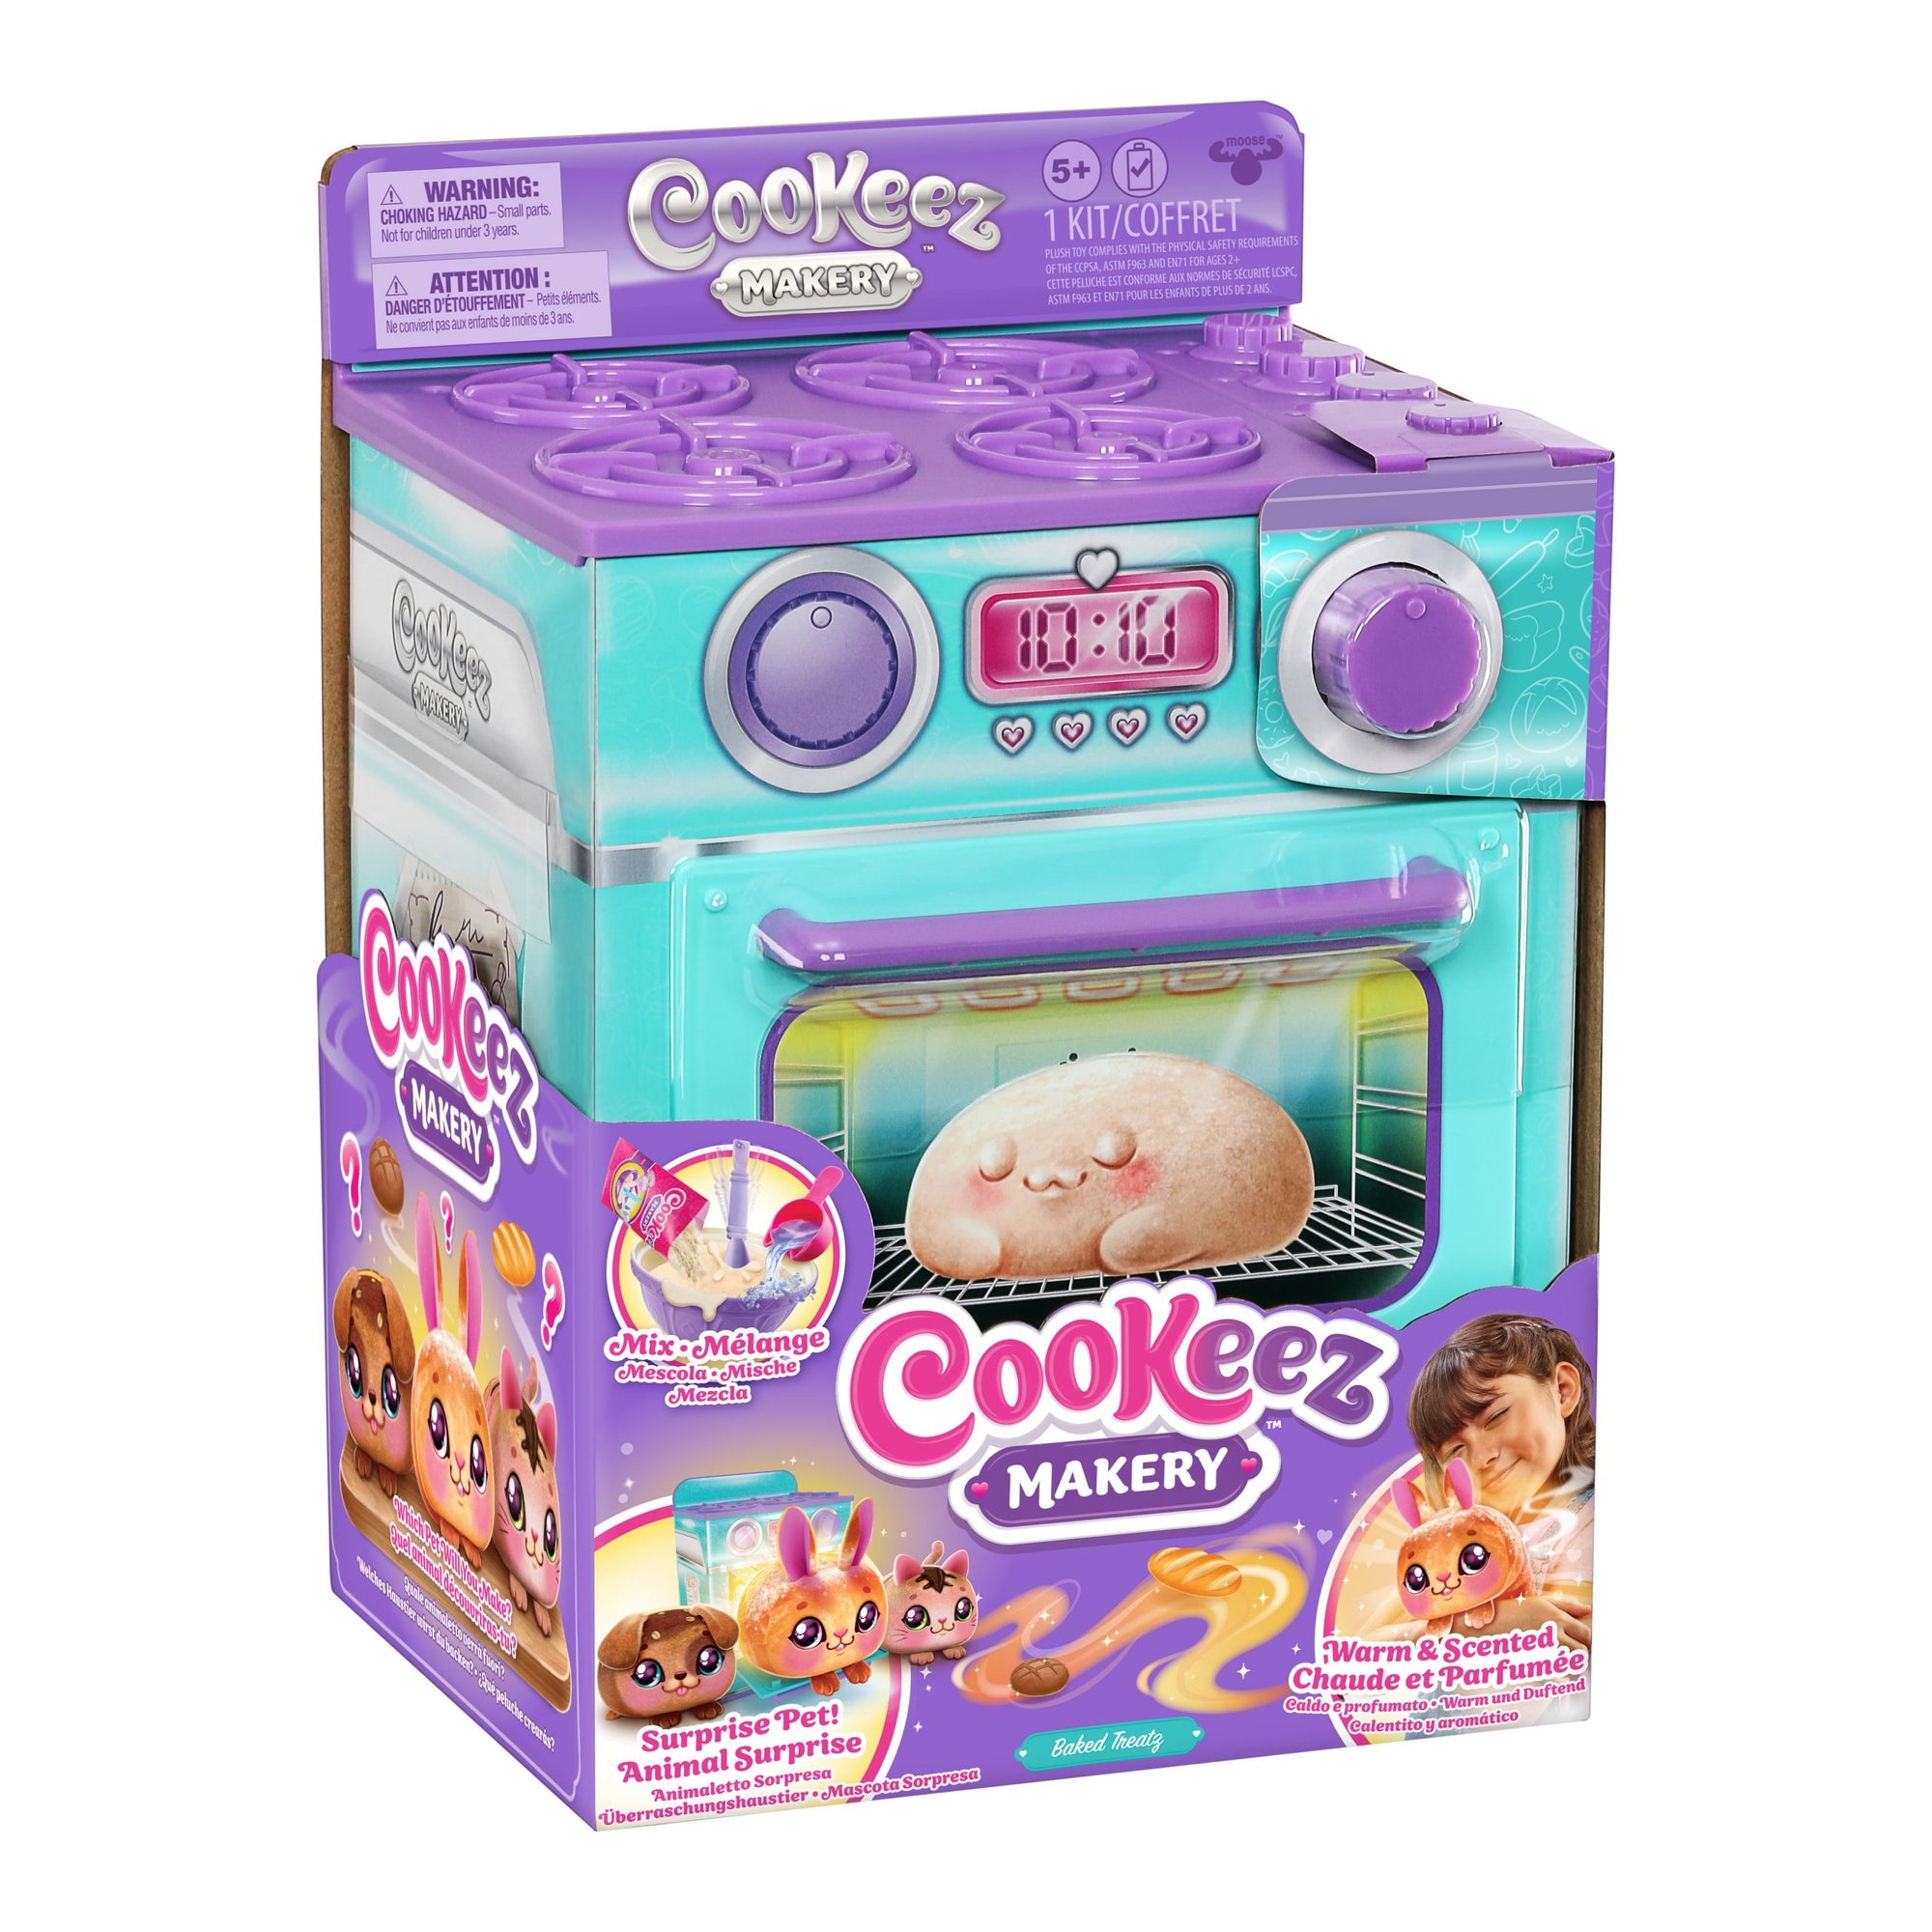 Cookeez Makery Oven Play Set Baked Treatz Bread batteries included